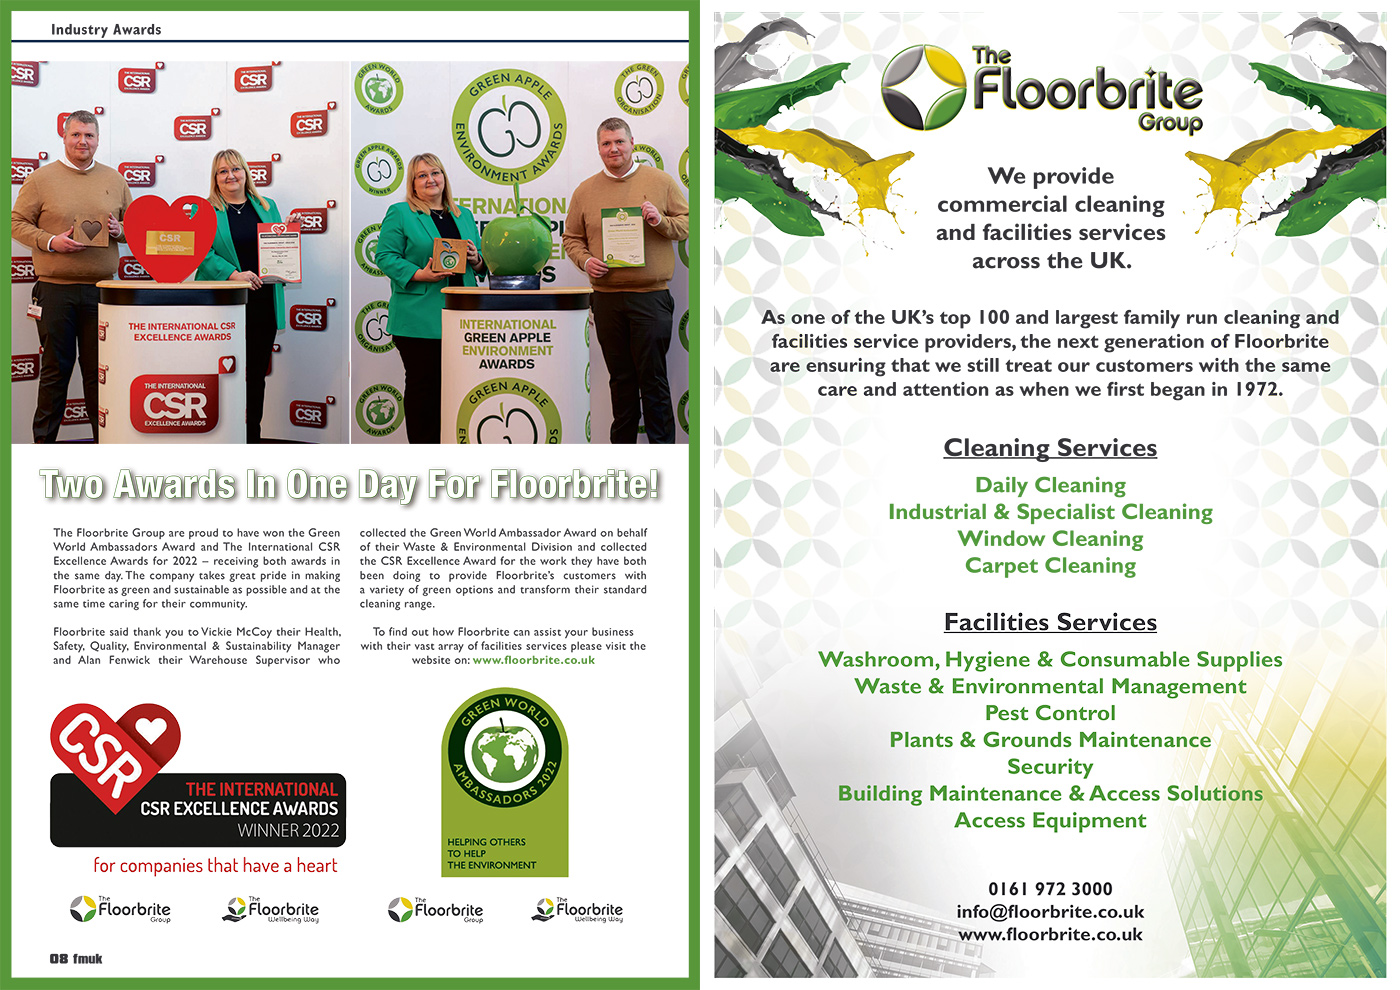 Two Awards In One Day For Floorbrite!